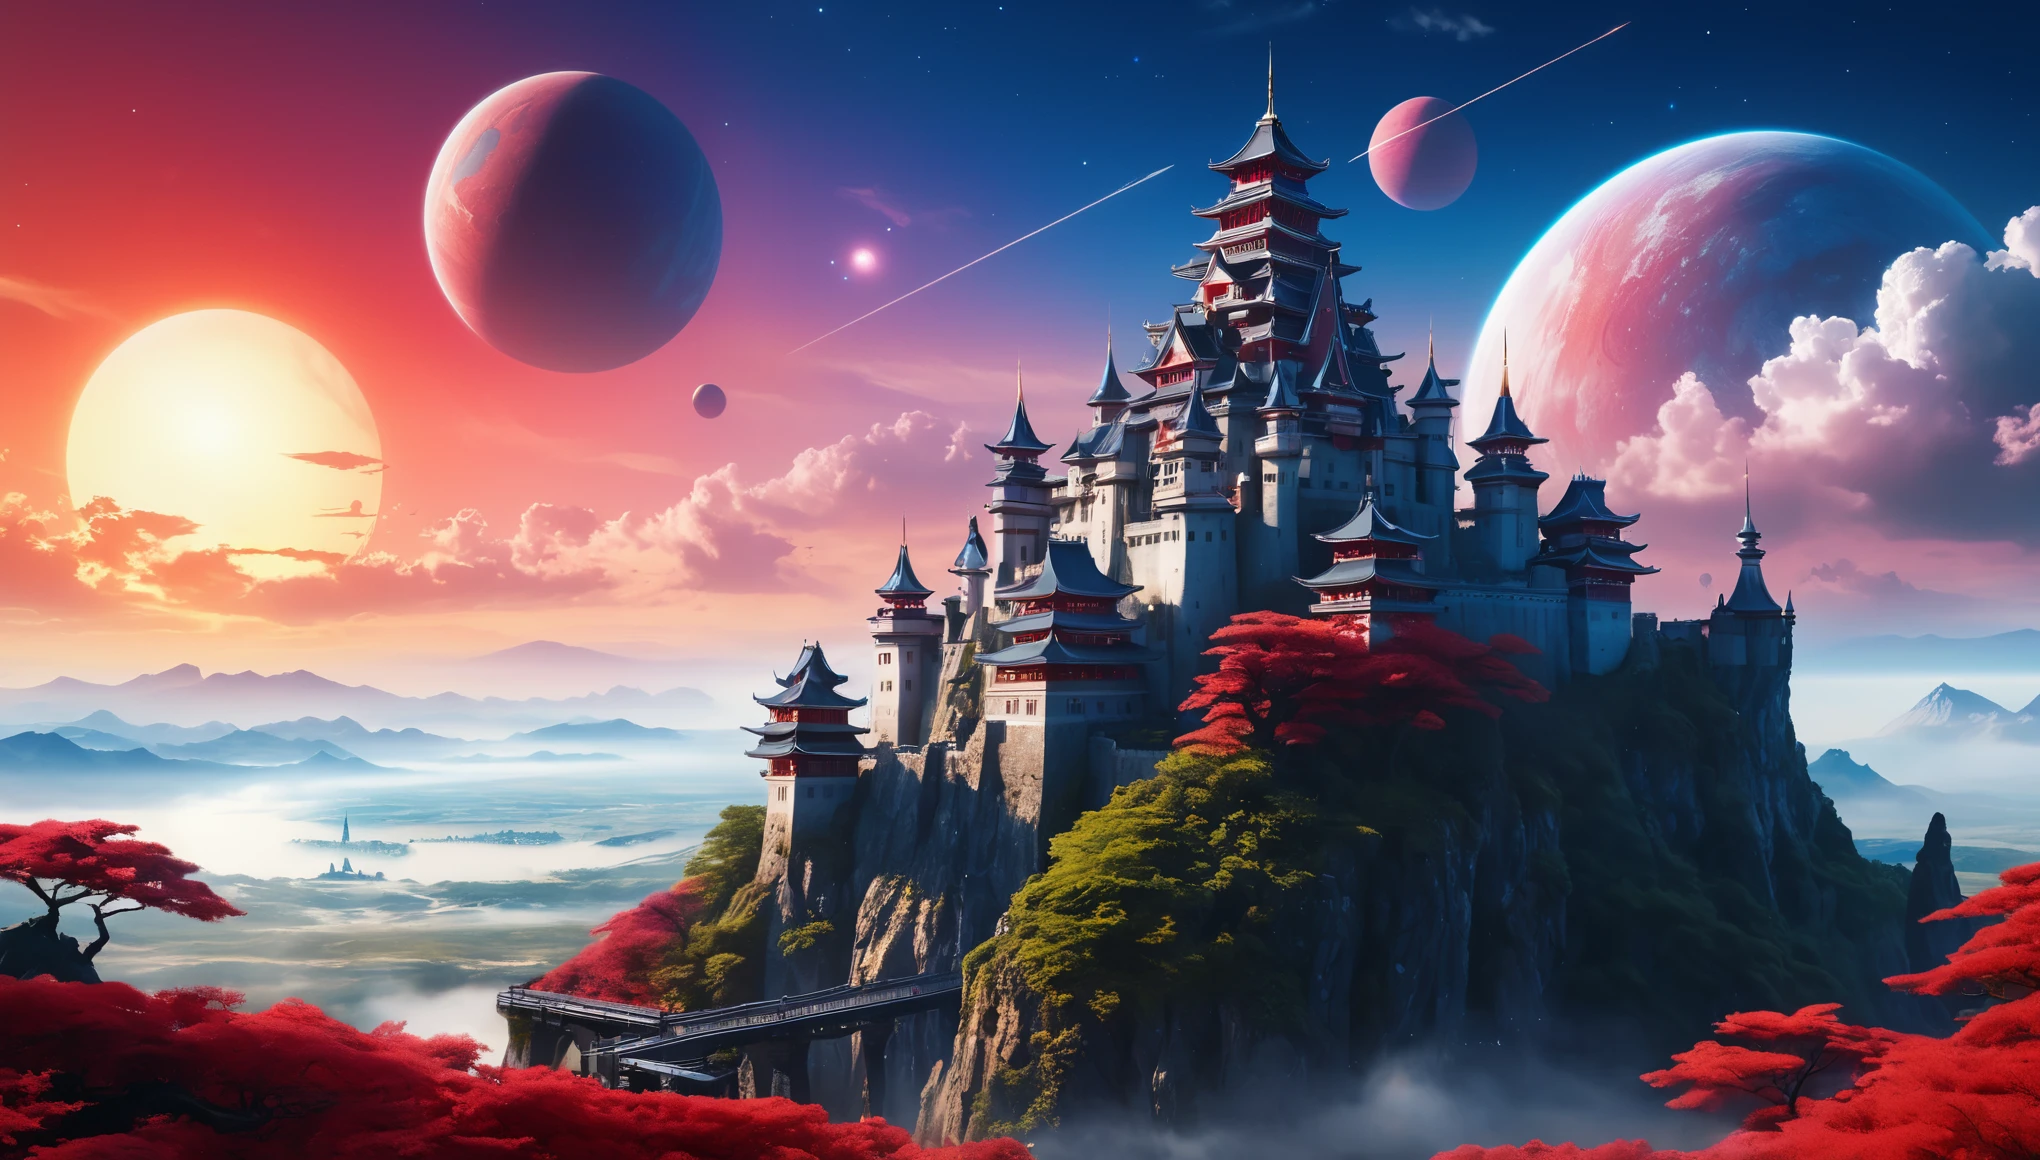 (best quality,4k,8k,highres,masterpiece:1.2),ultra-detailed,(realistic,photorealistic,photo-realistic:1.37), A dream castle, a mythical Japanese-style castle in a sci-fi world, (white, red, blue, black) wallls and roofs, an alien planet, a beautiful and breathtaking view, a beautifully situated castle on the edge of a hill, the colorful sky of an alien planet, strange but beautiful sunset, modern technology installed around the castle, flying machines in sky